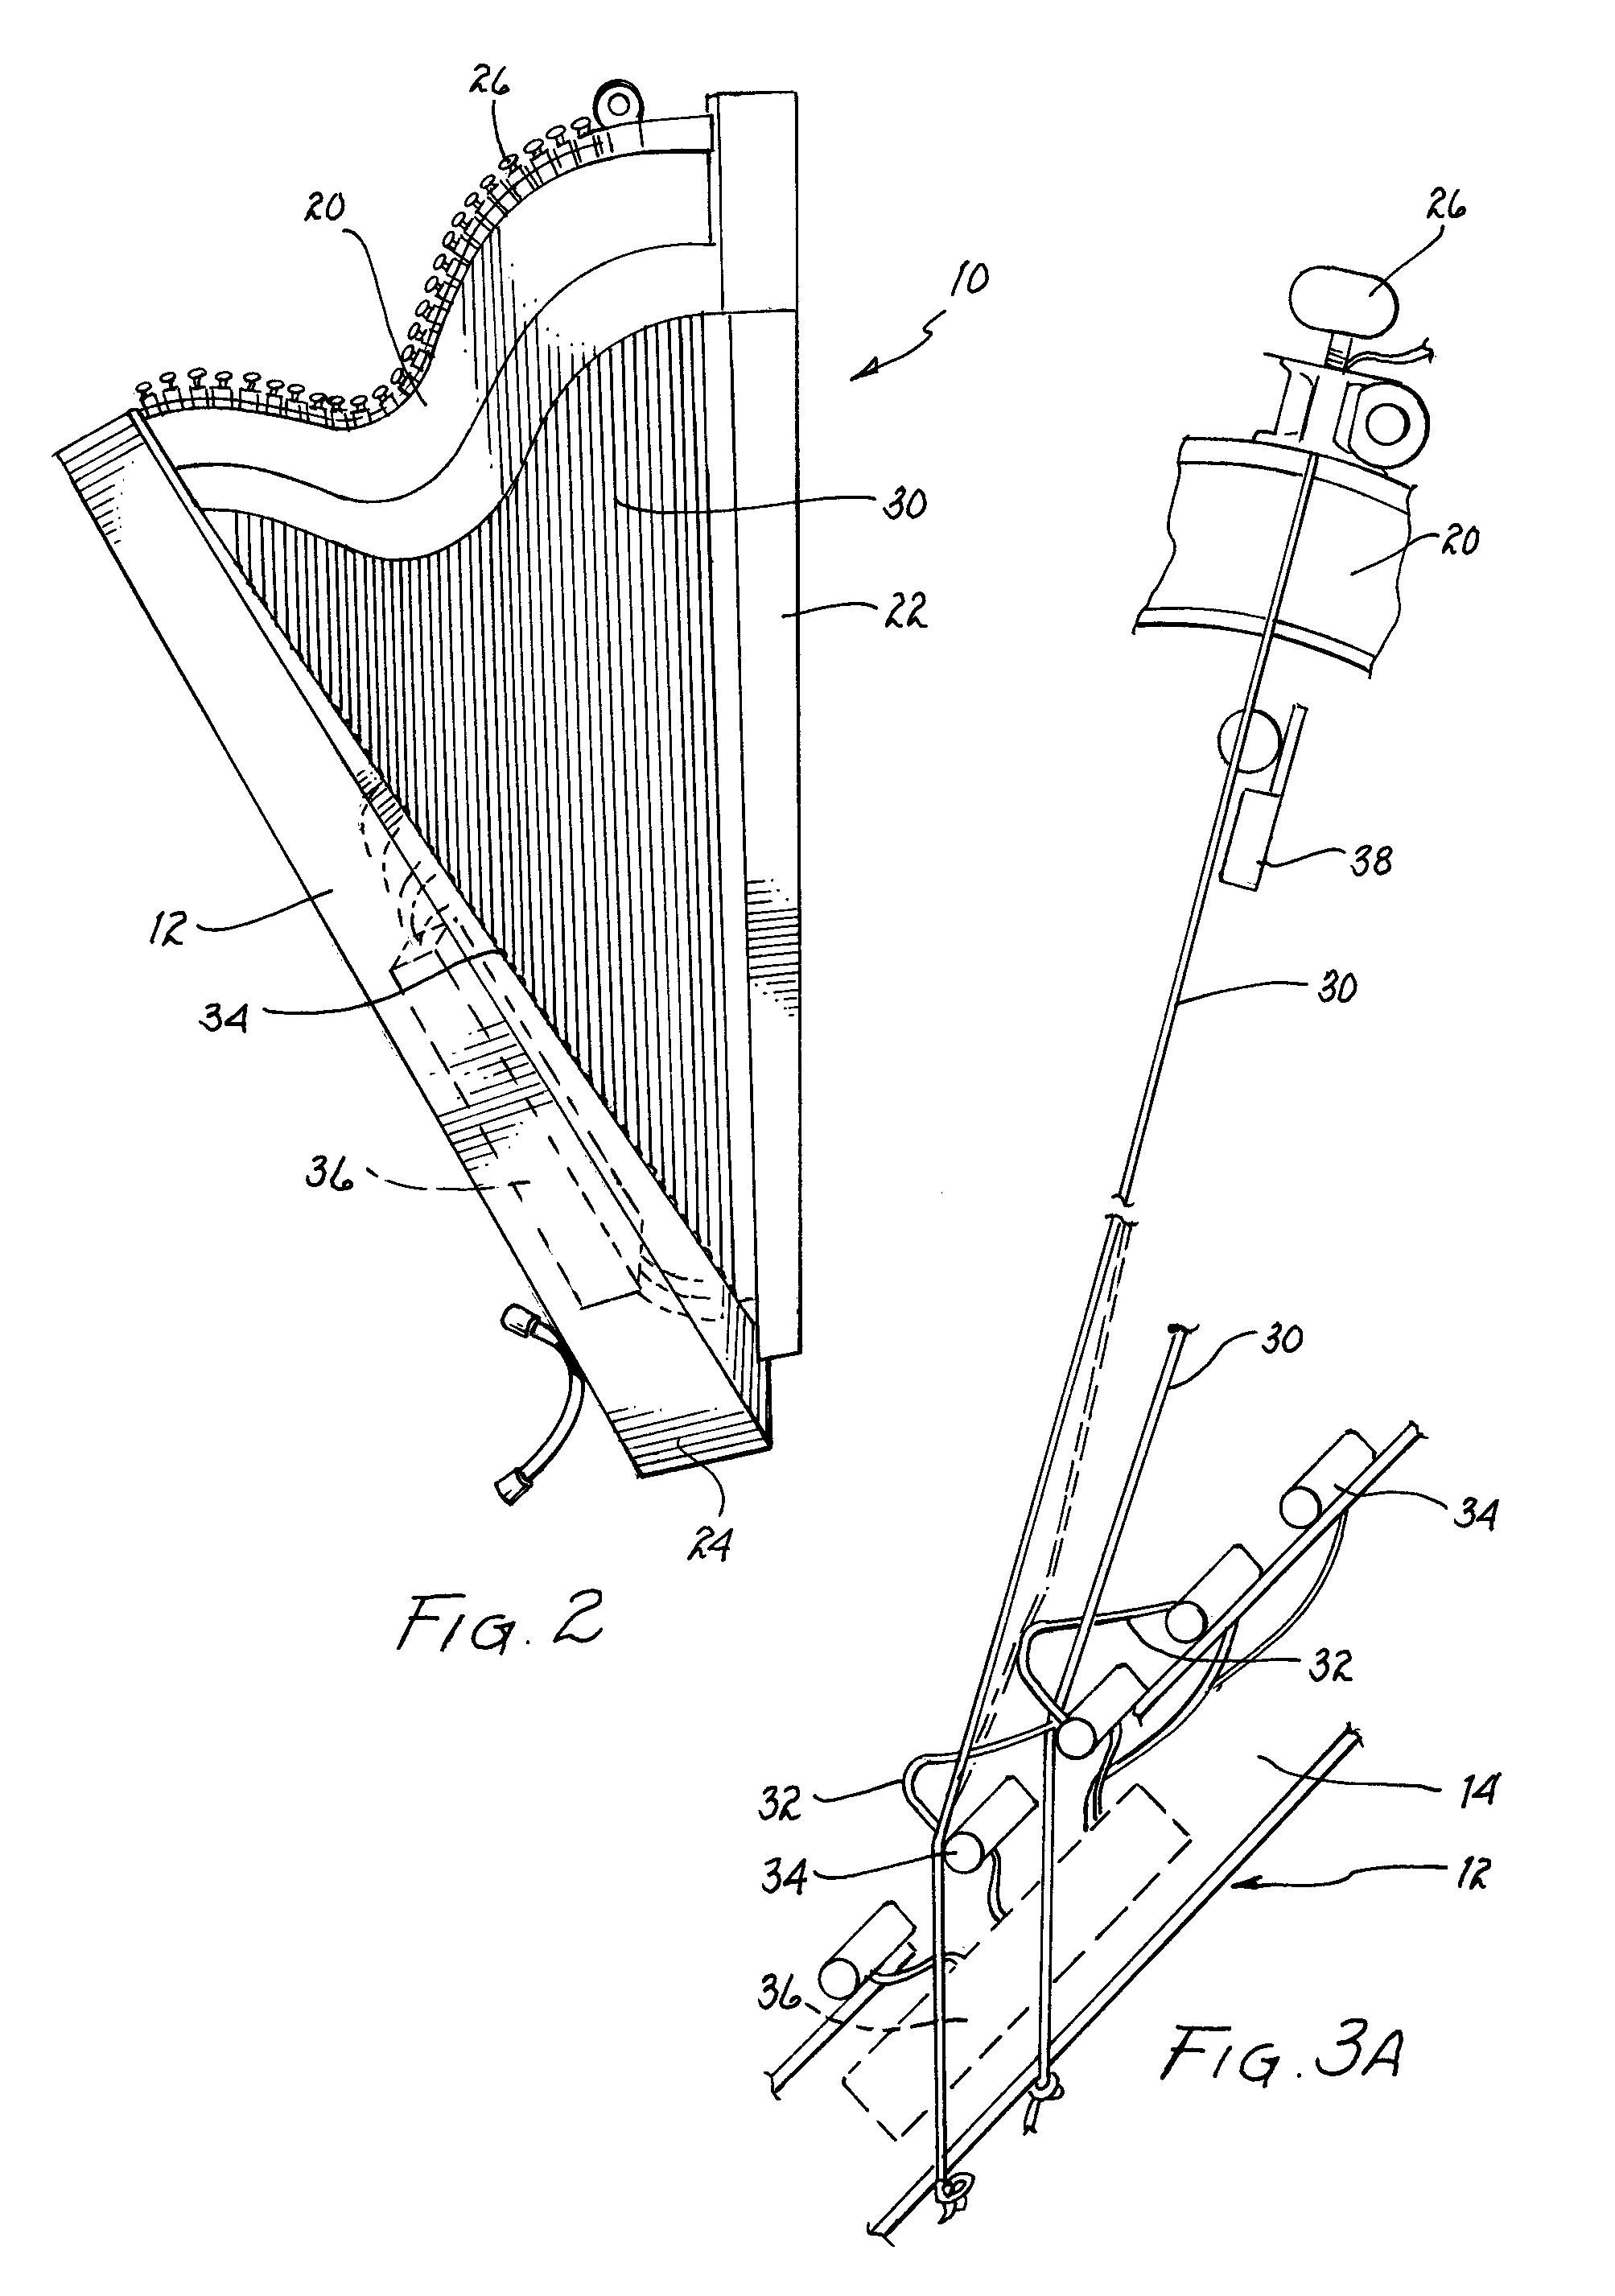 Harp with exposed soundboard and separate bridges and method of altering the pitch of the harp strings